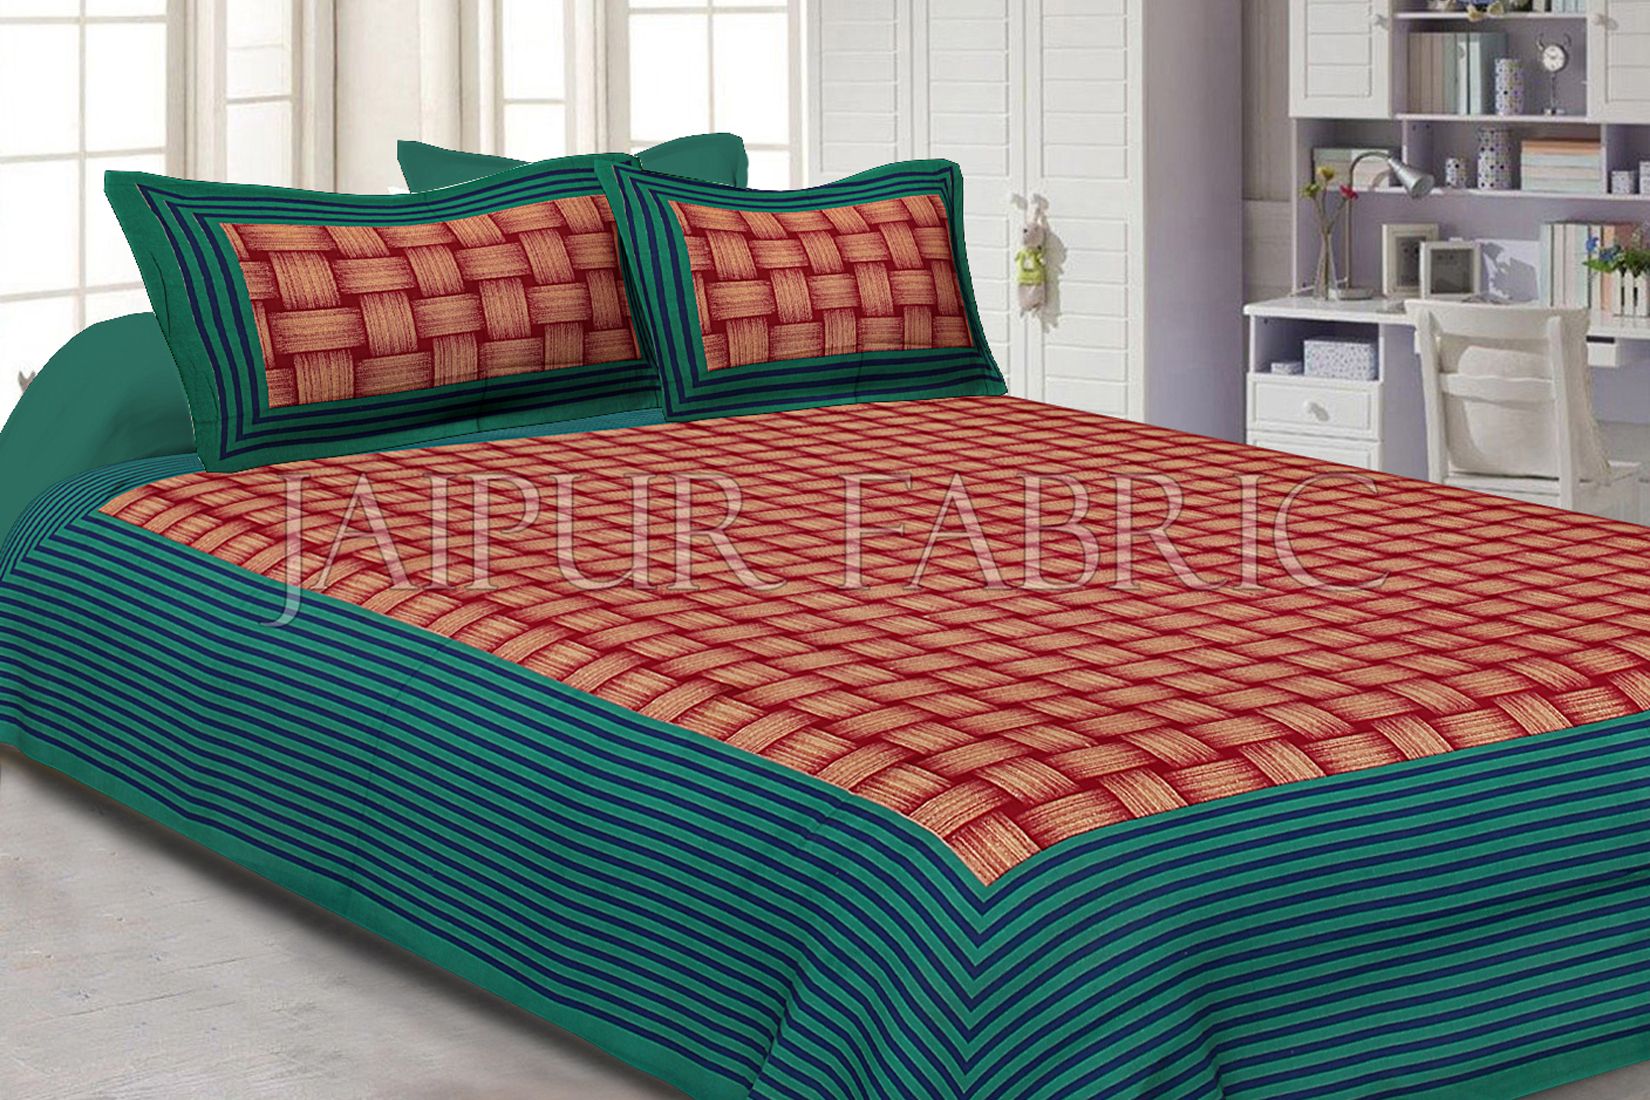 Green Border With Lining Check Pattern Cotton Double Bed Sheet